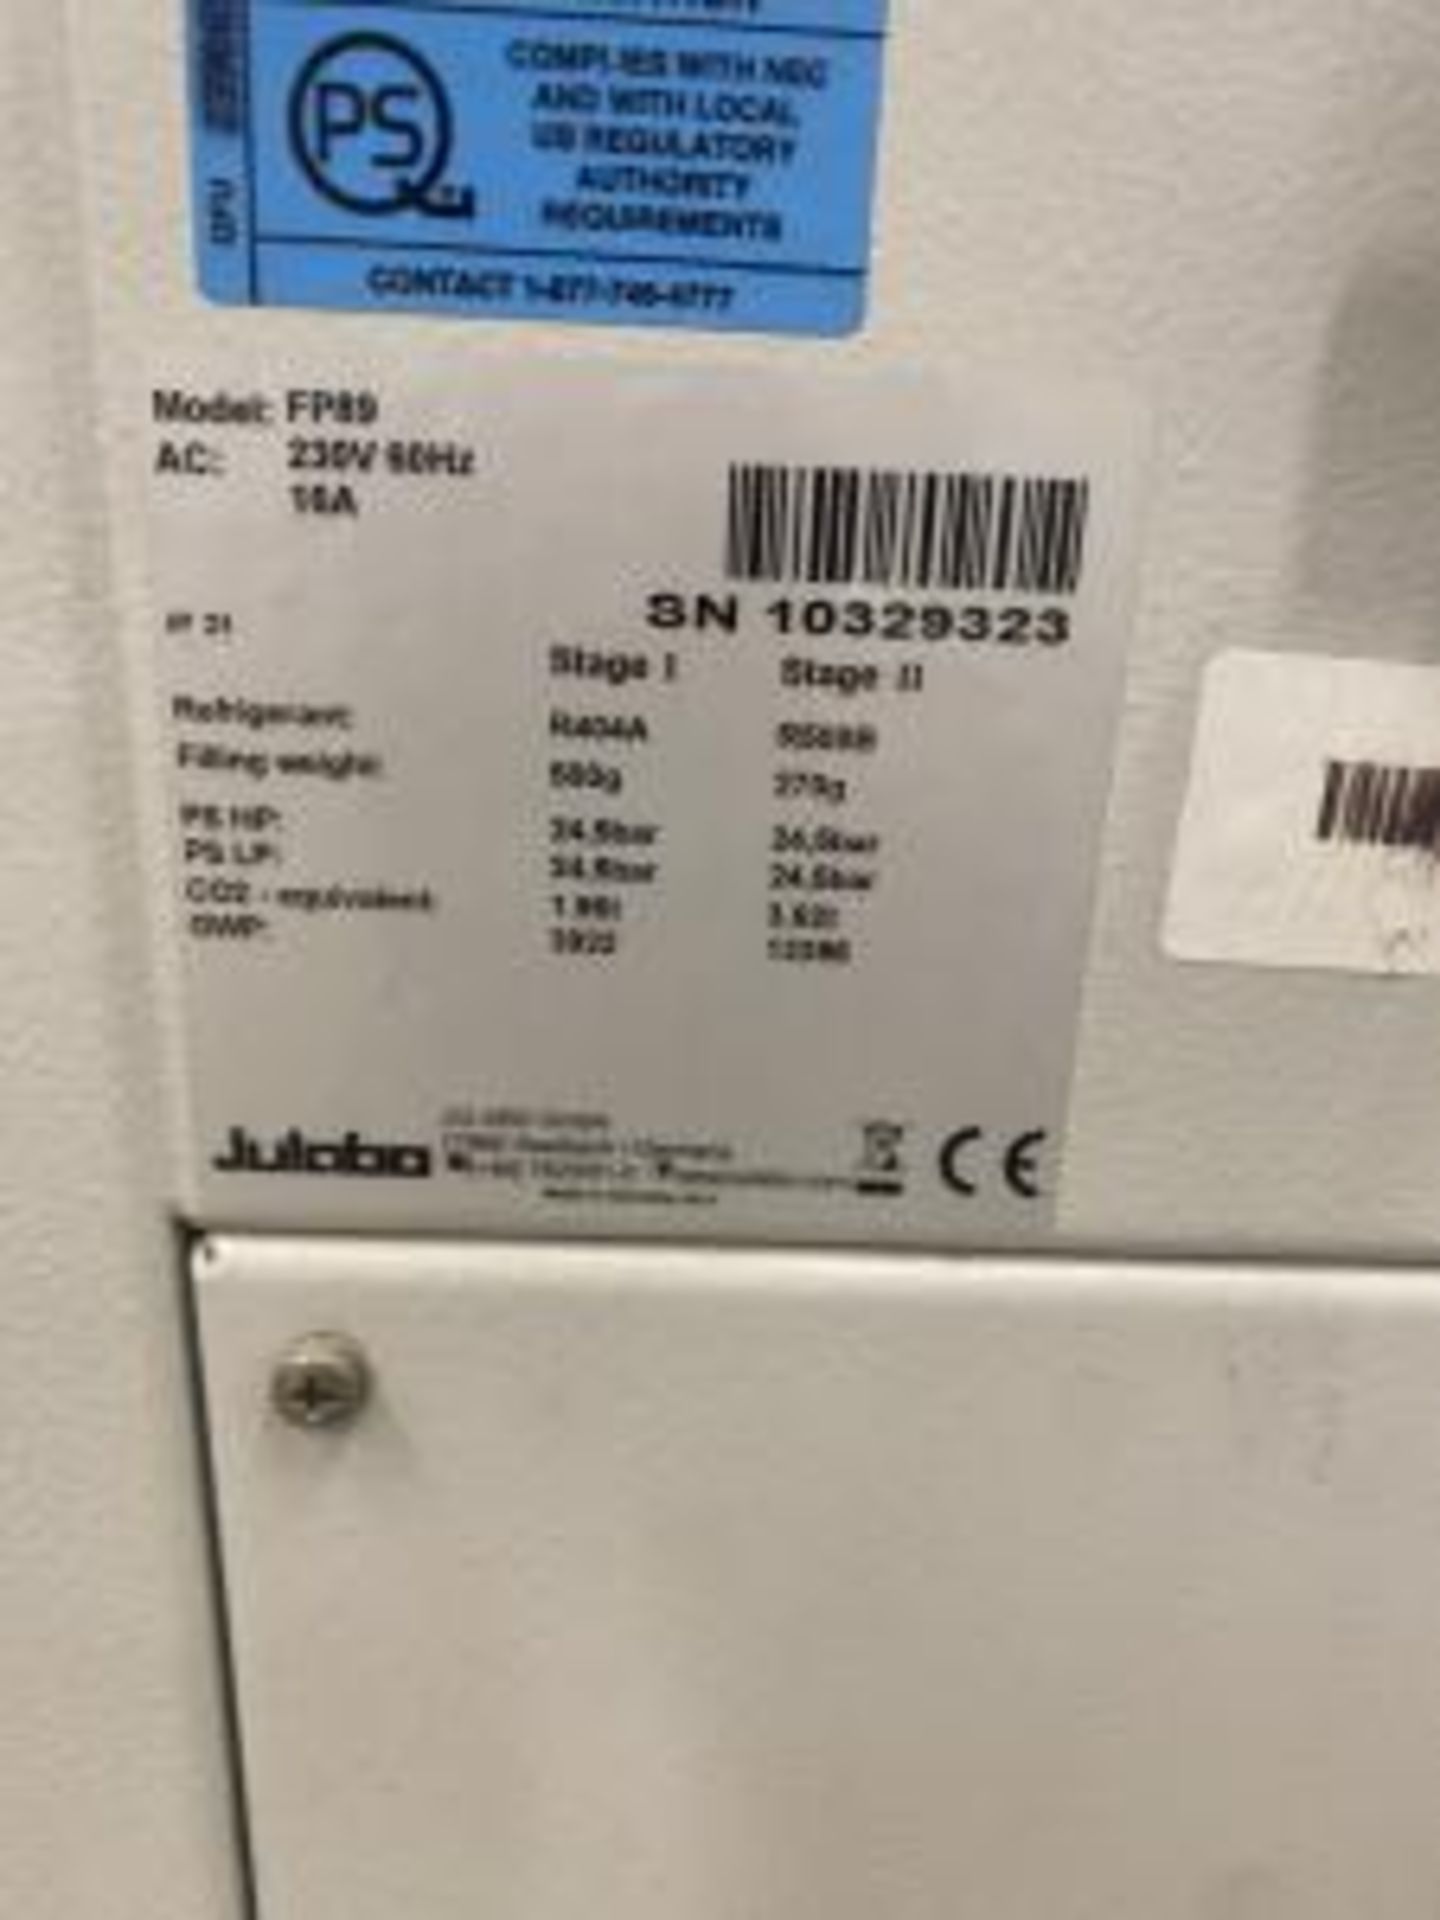 Used Julabo -90C To +100C Refrigerated-Heated Circulator. Model FP89 - Image 3 of 3